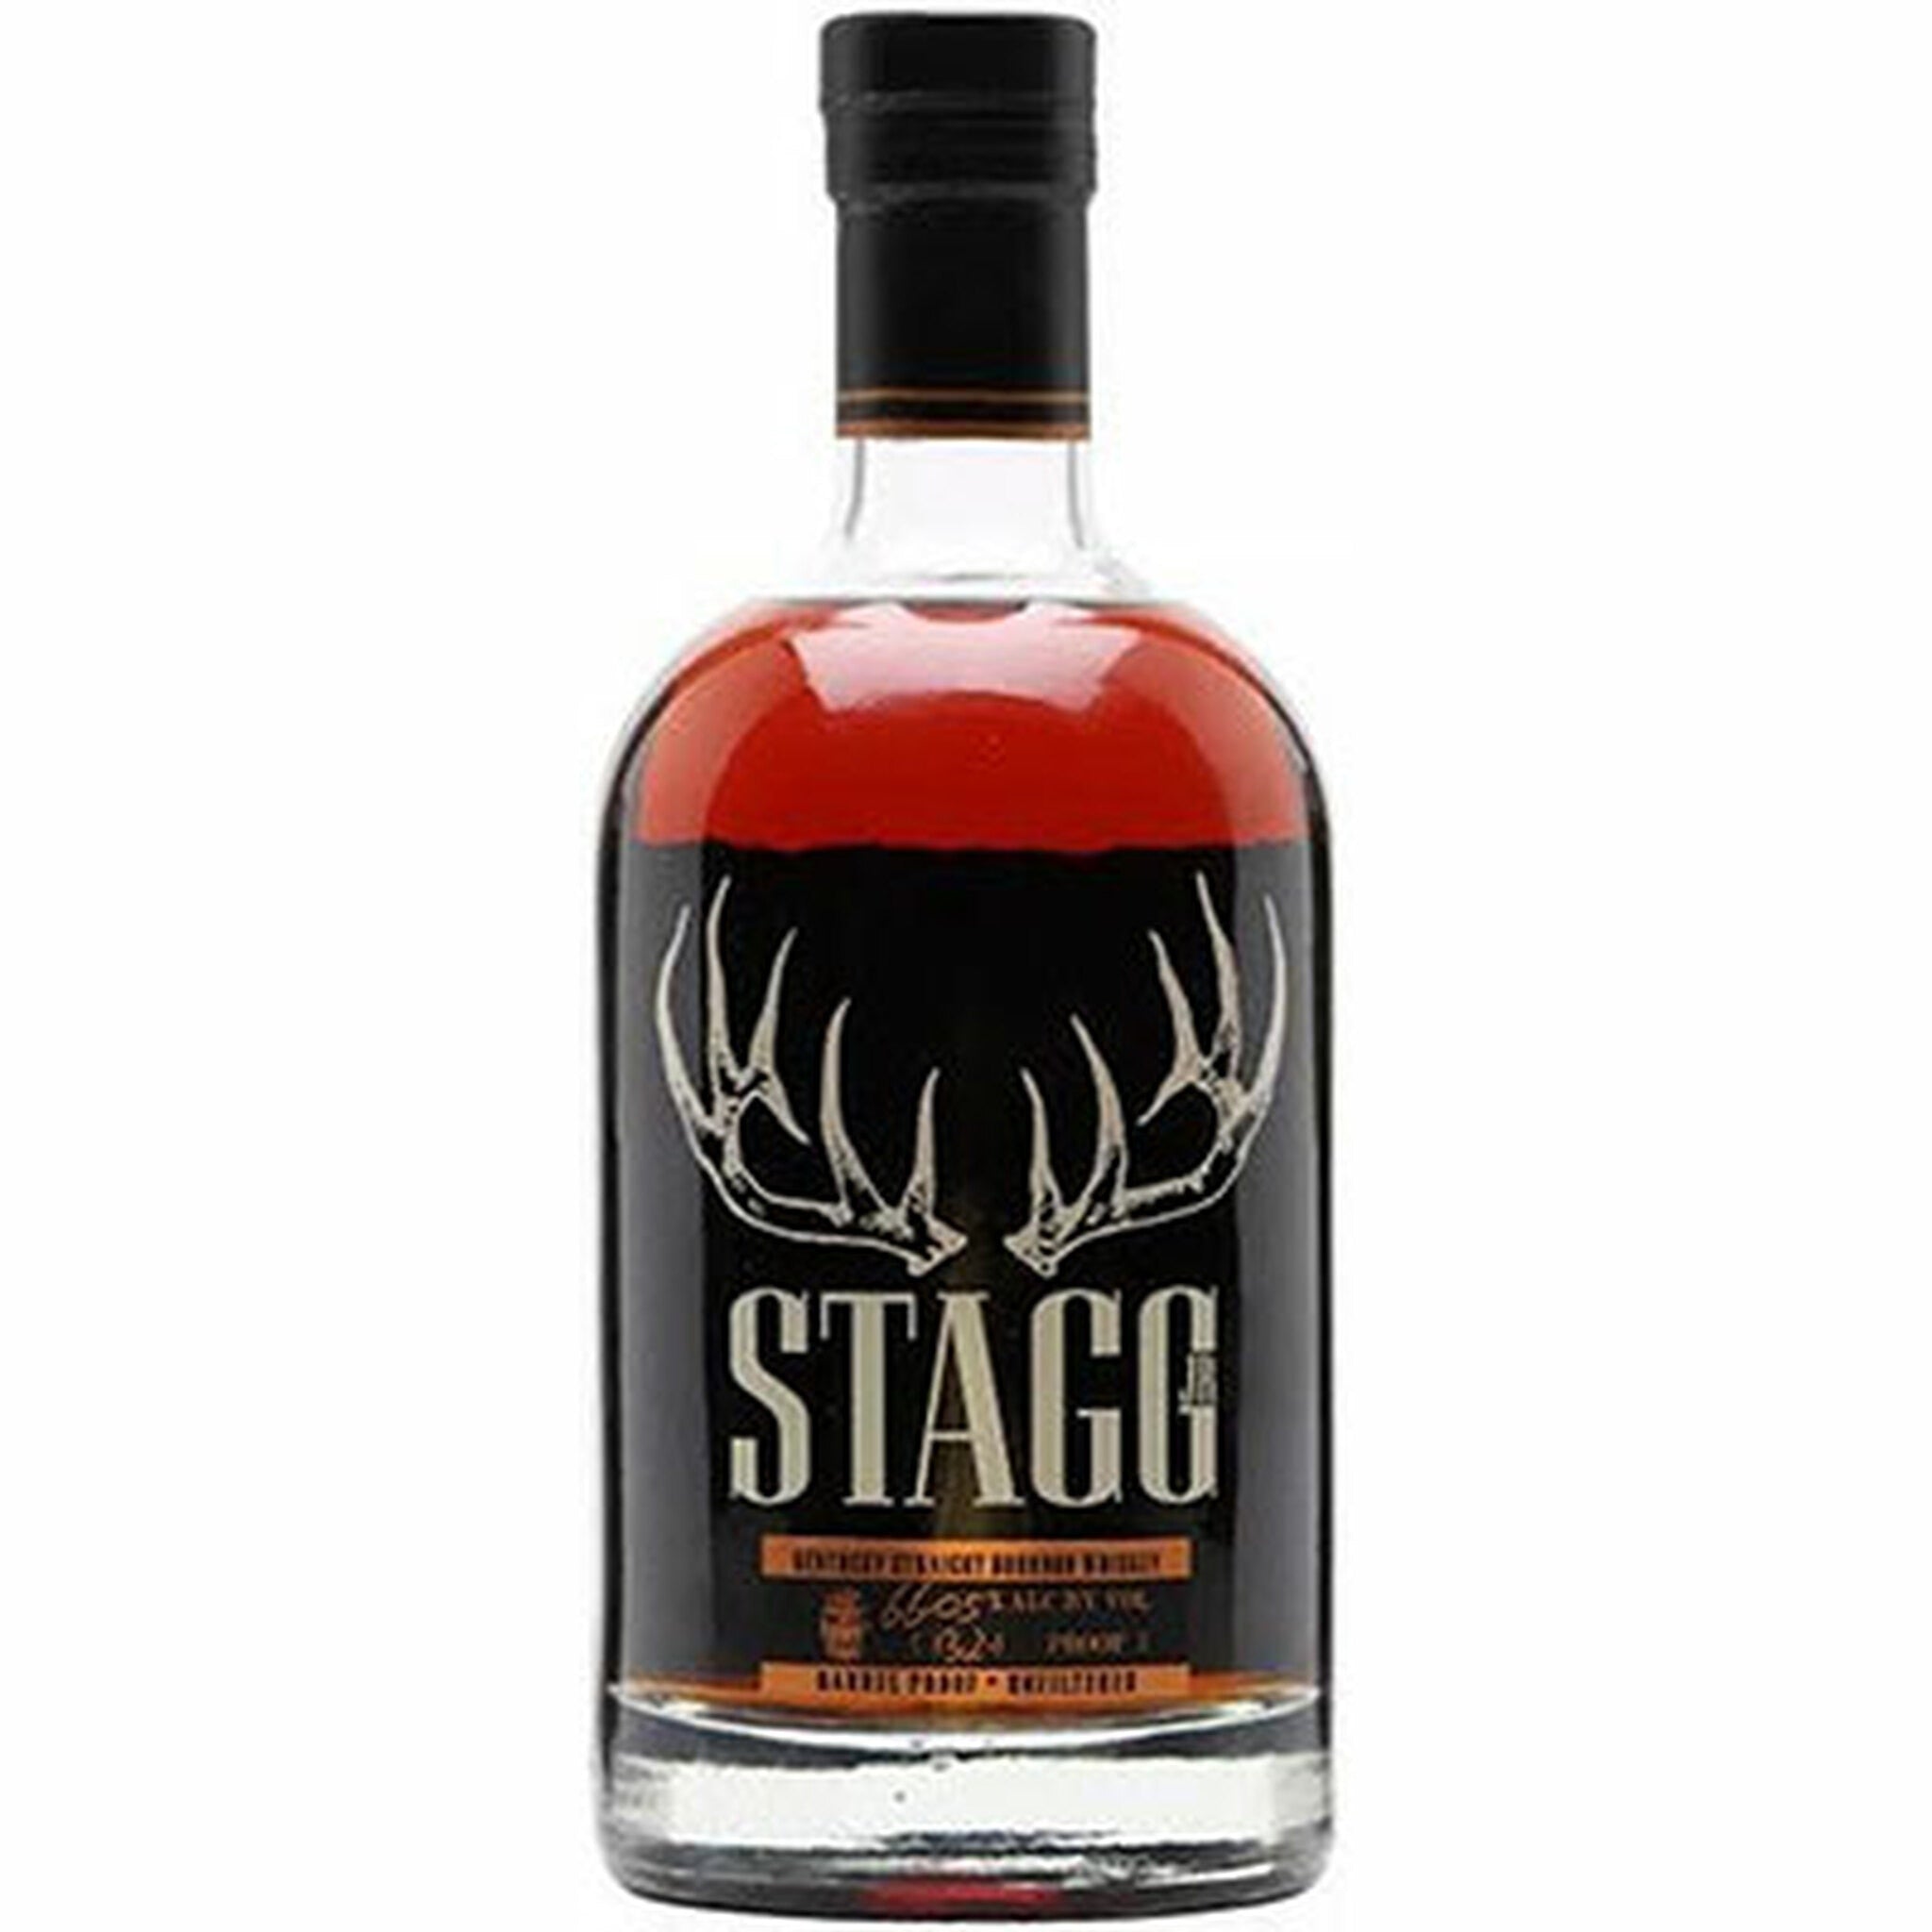 Stagg Jr Kentucky Straight Bourbon Whiskey Barrel Proof Unfiltered